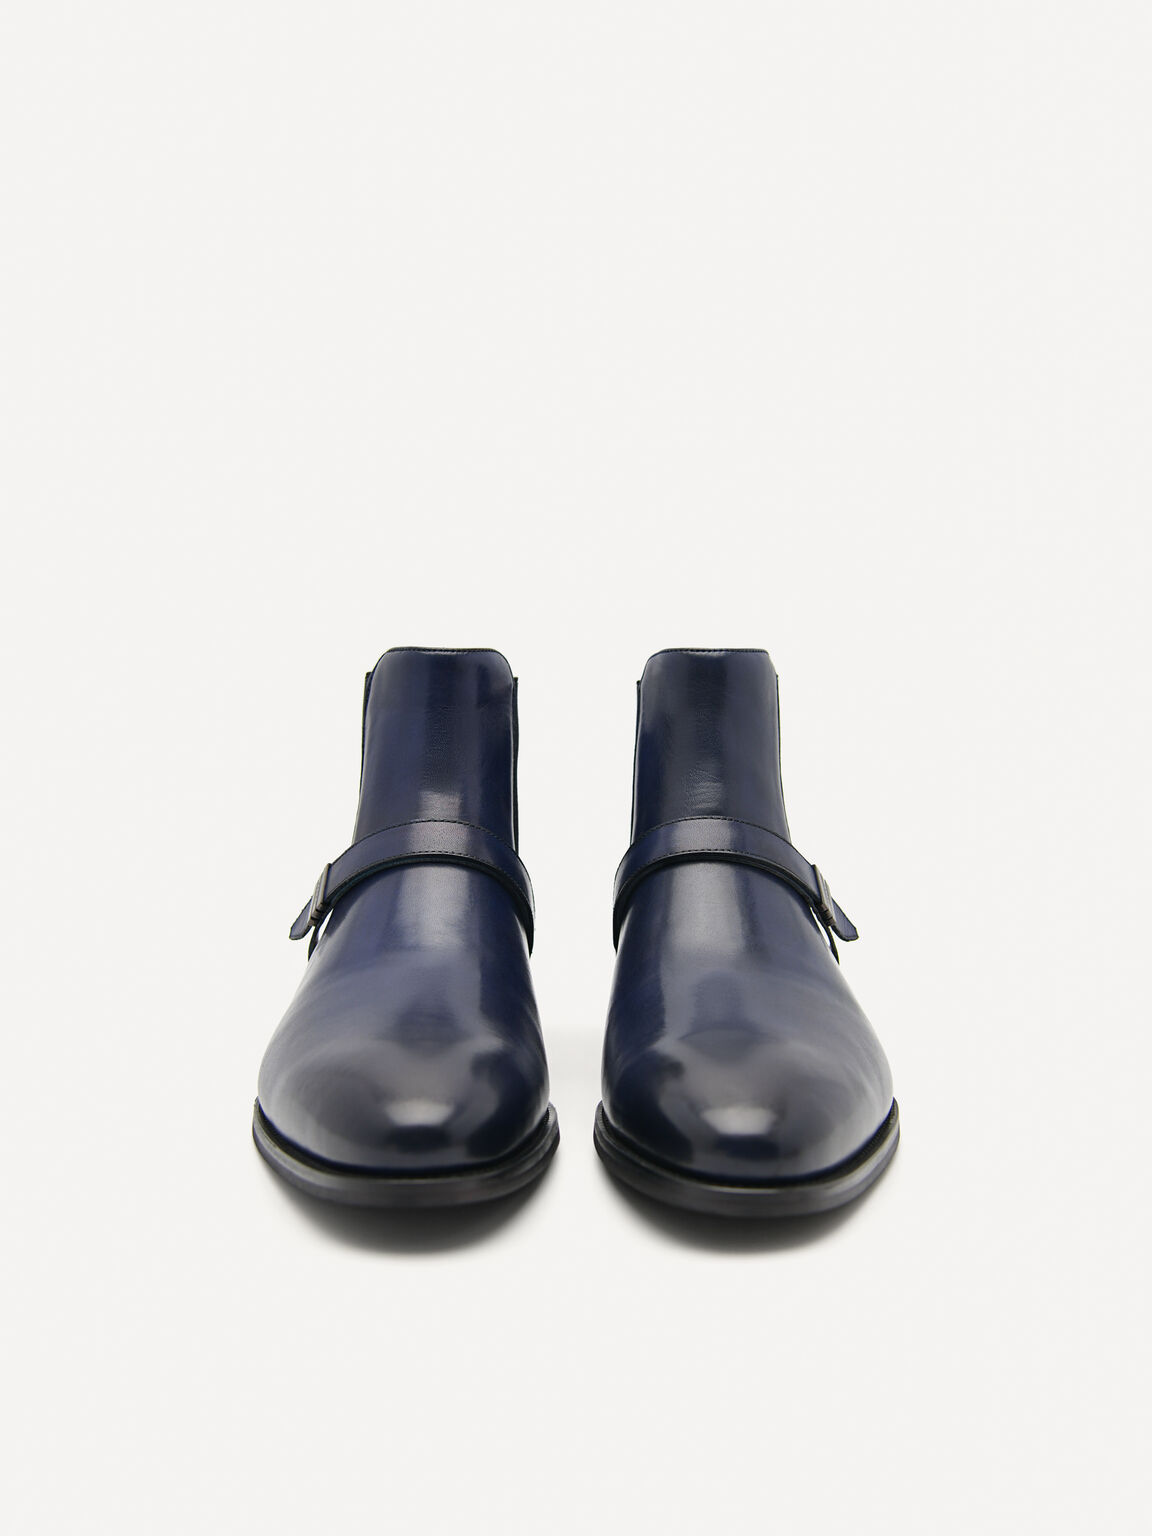 Brooklyn Leather Strapped Boots, Navy